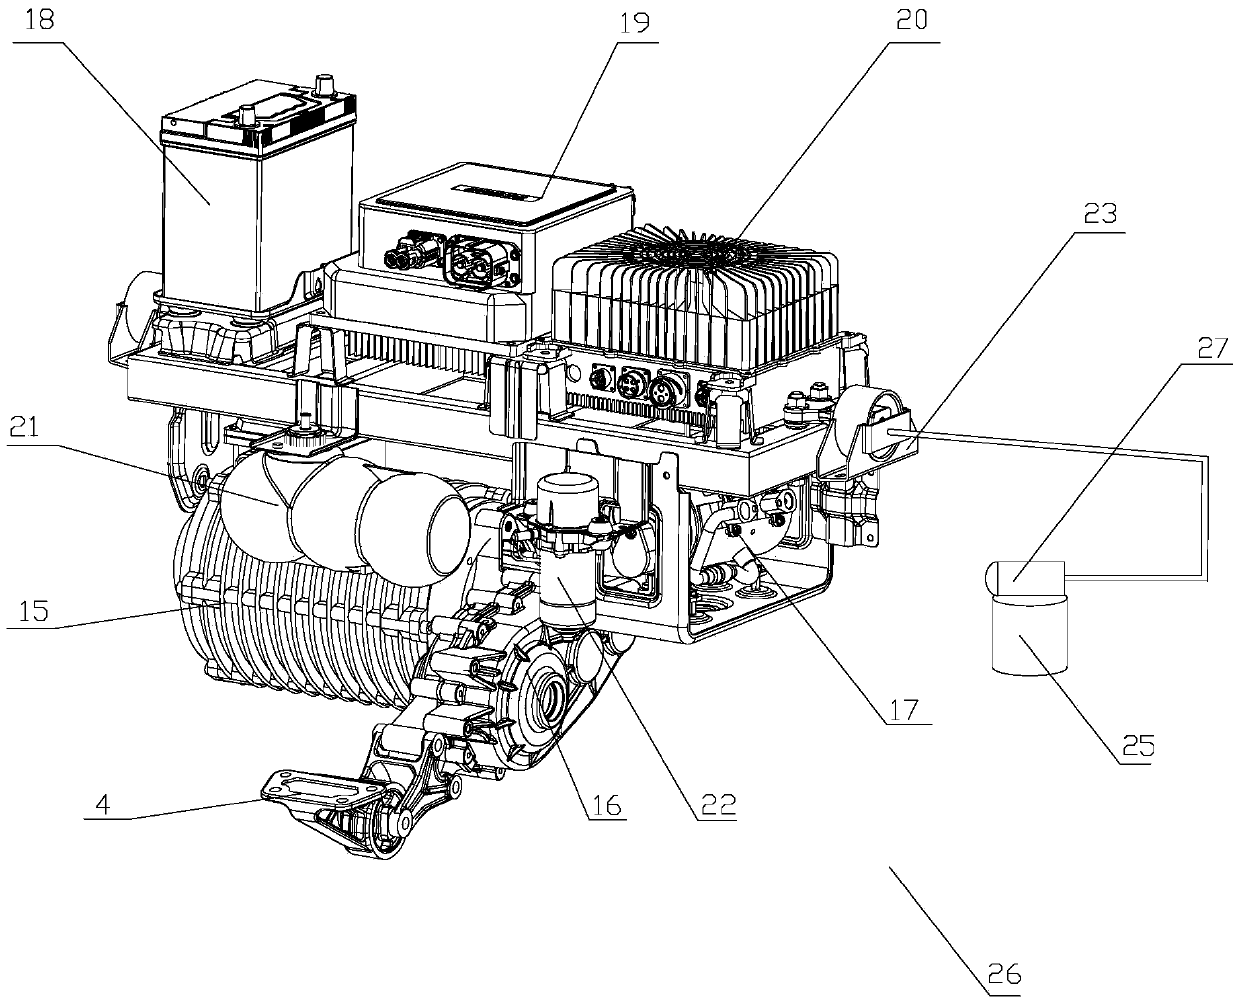 Electric vehicle suspension system